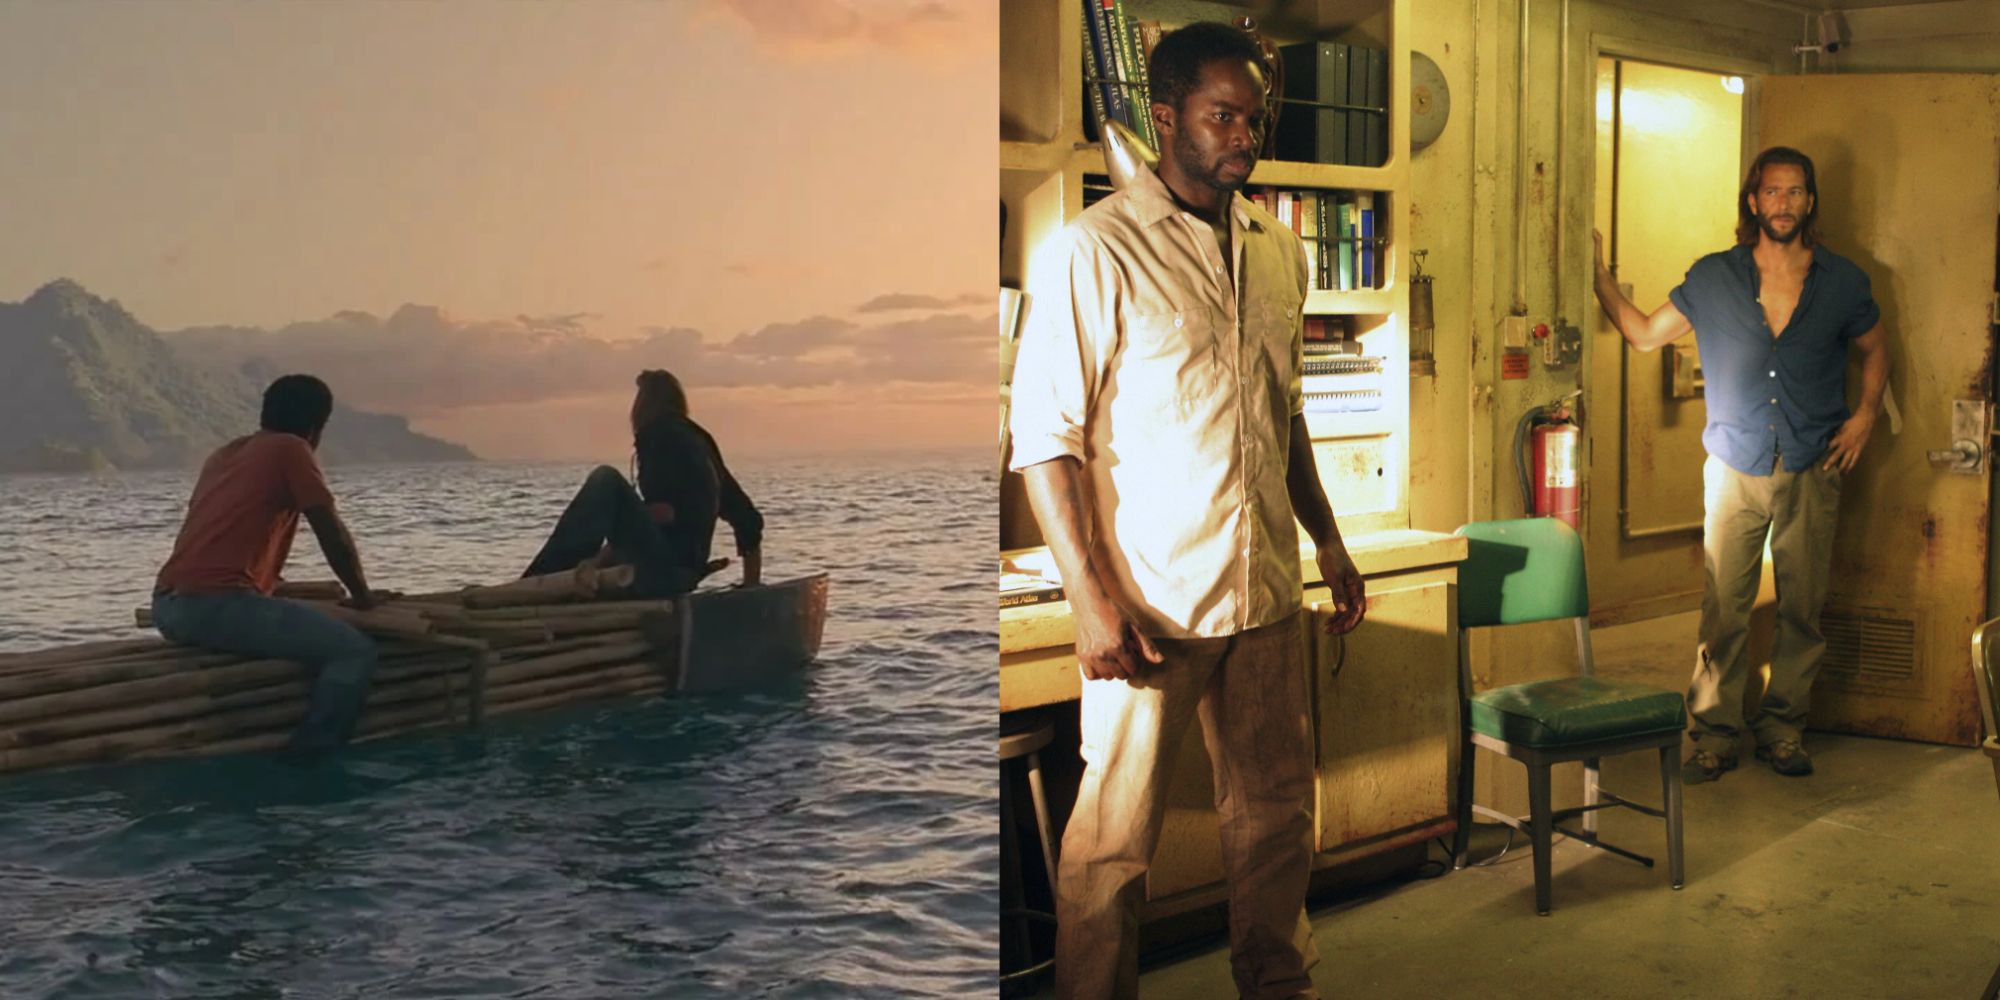 Split image of Michael and Sawyer on a raft and Michael with Desmond